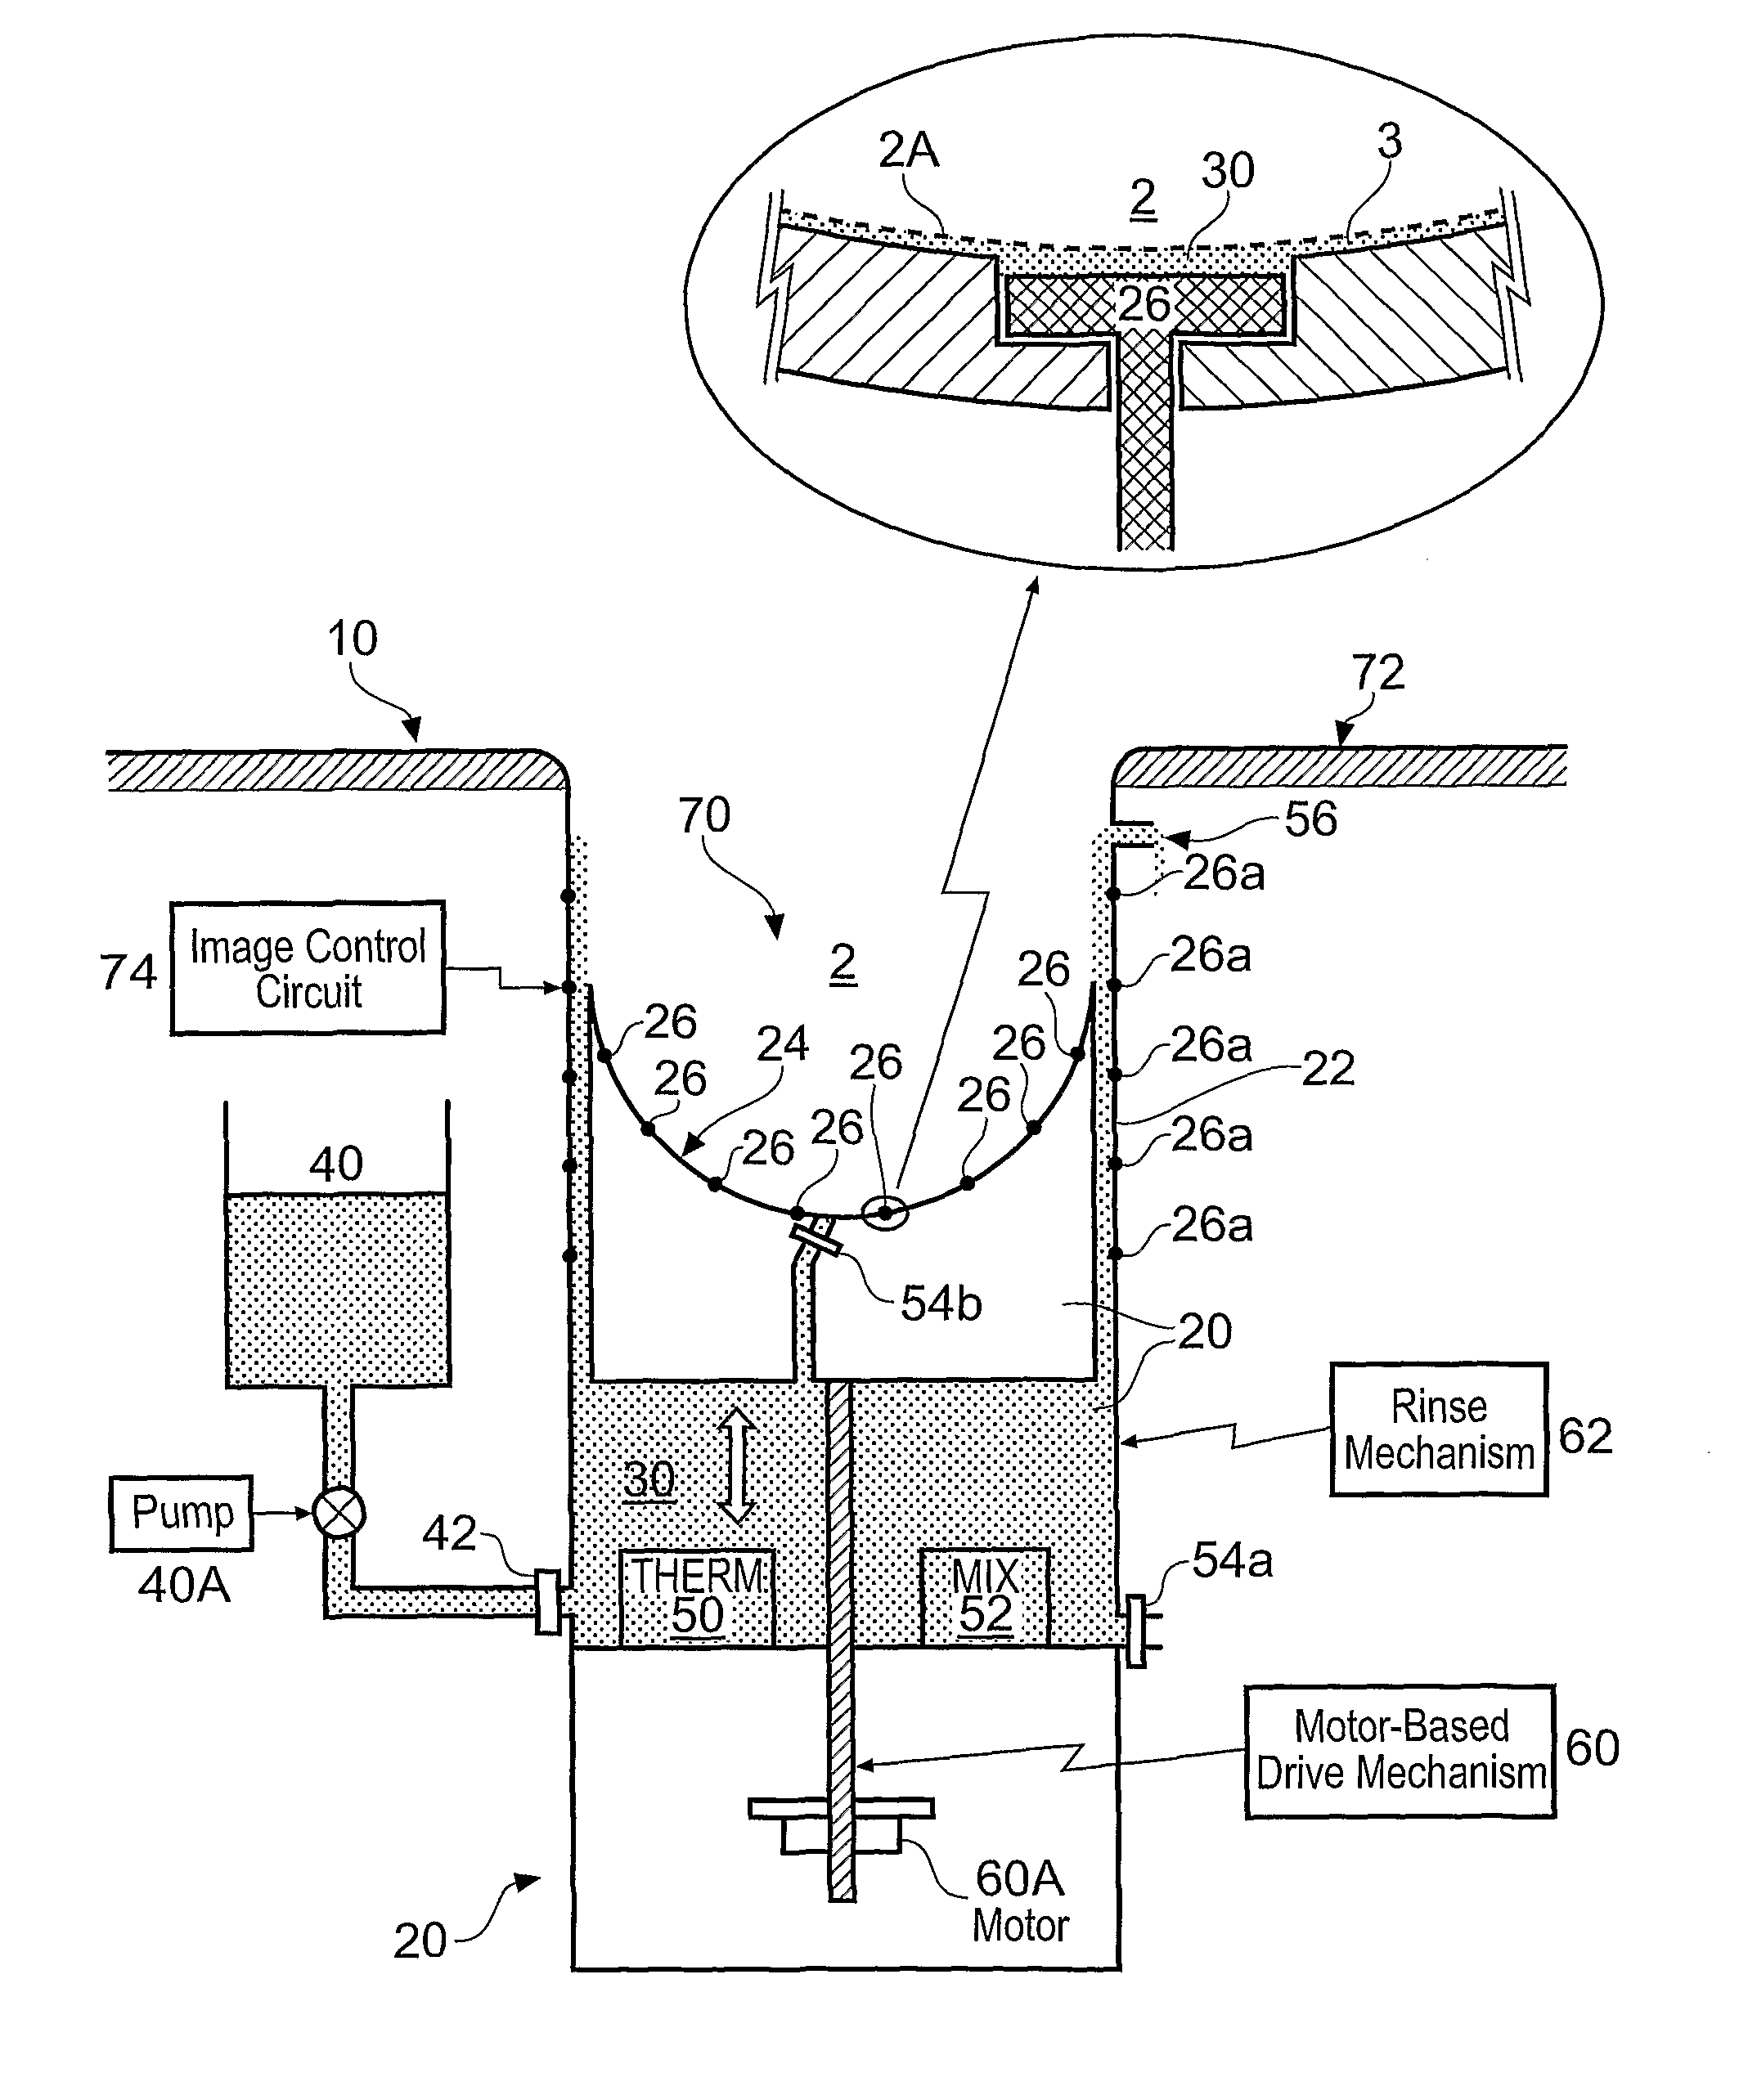 Apparatus and method for non-contact electrical impedance imaging